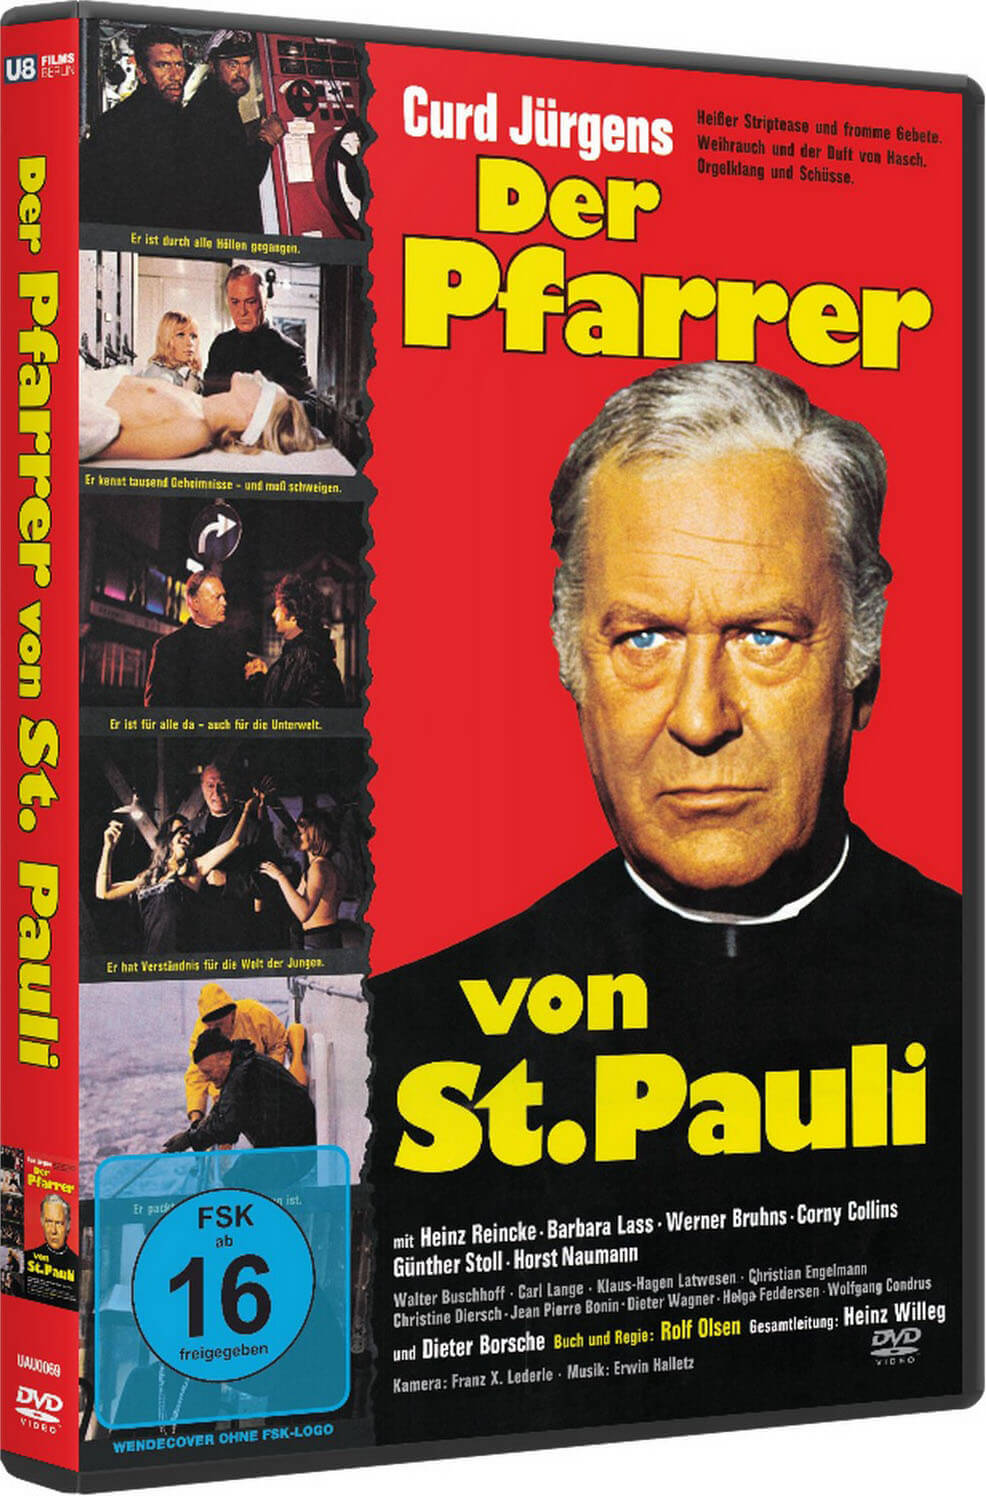 The Priest of St. Pauli (1970) by Rolf Olsen